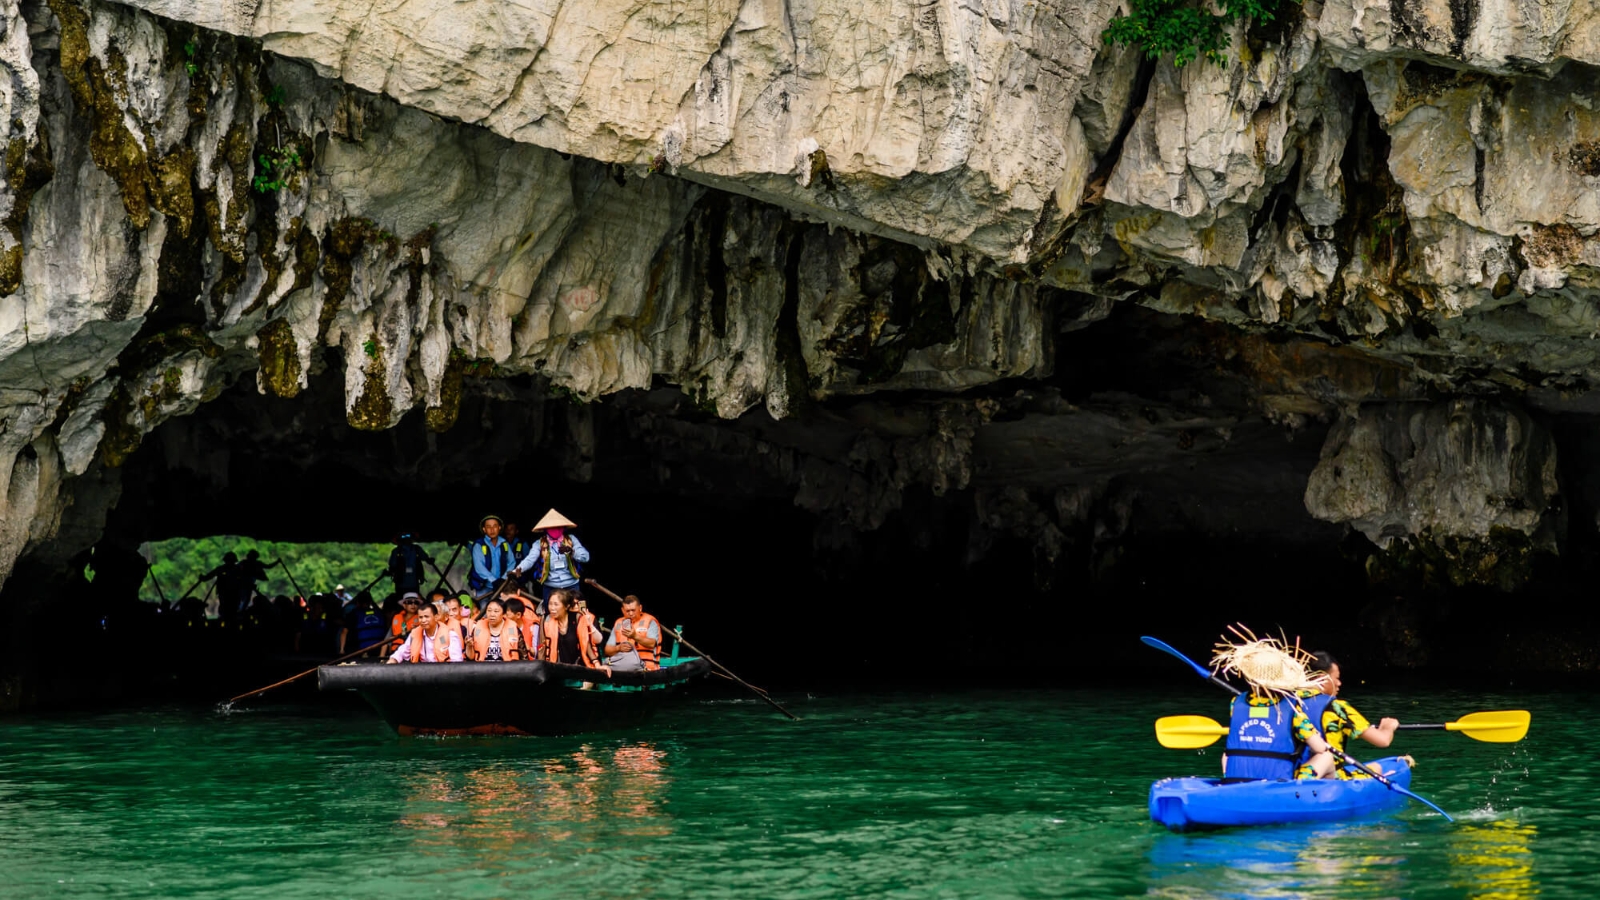 Sitting on the bamboo boat for sightseeing or kayaking to explore the Cave on your own